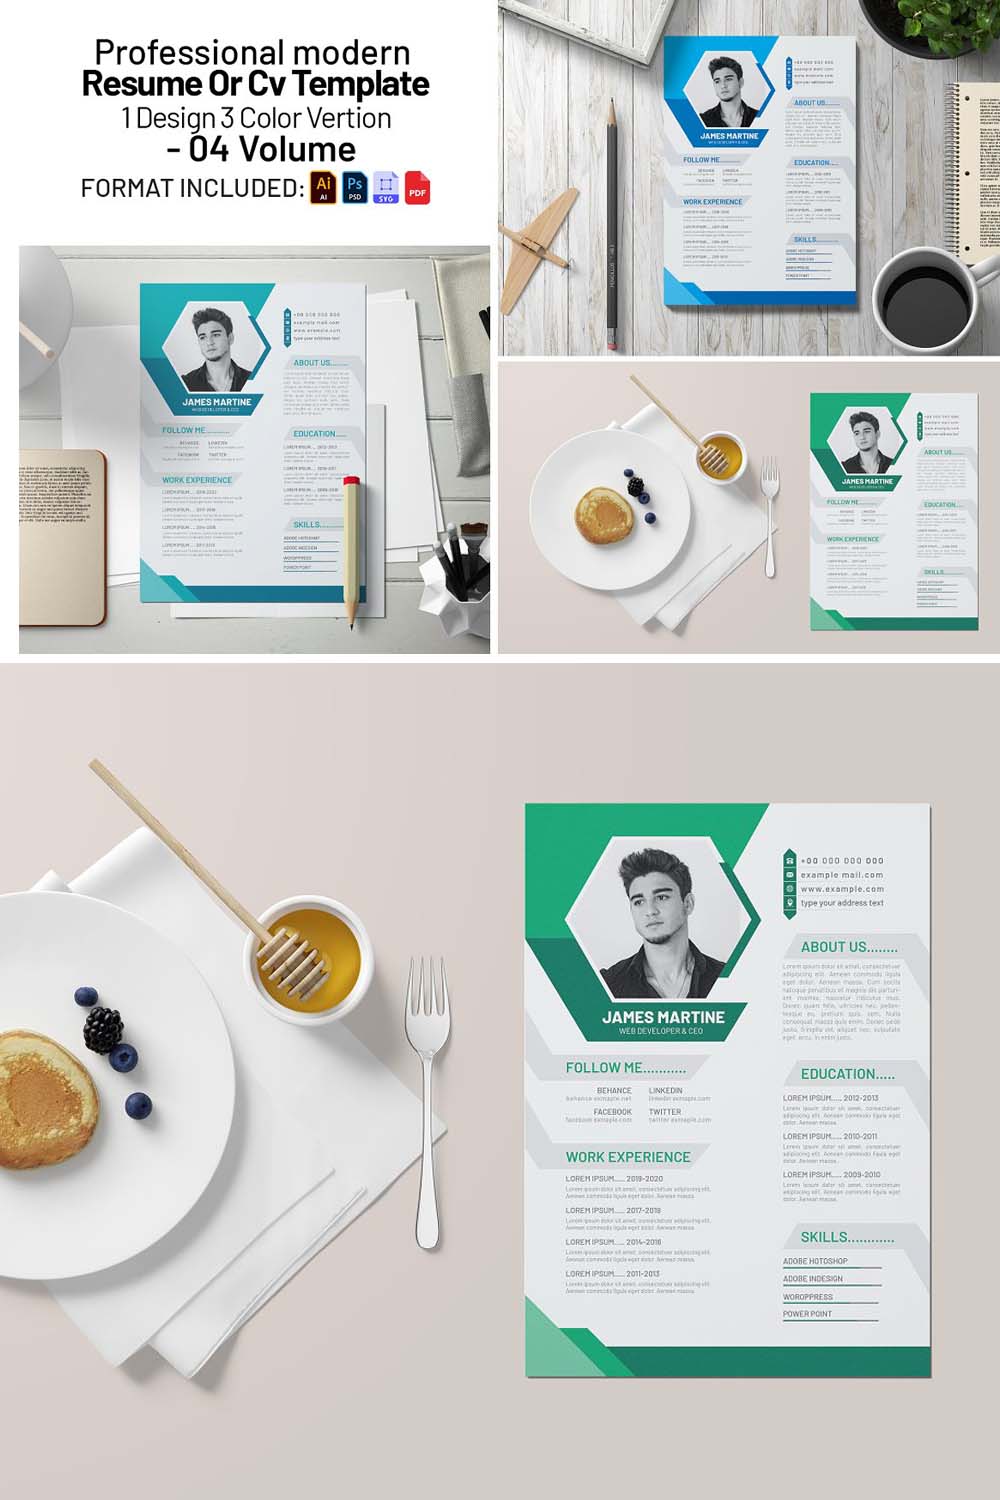 Professional Resume Or CV Templates pinterest preview image.